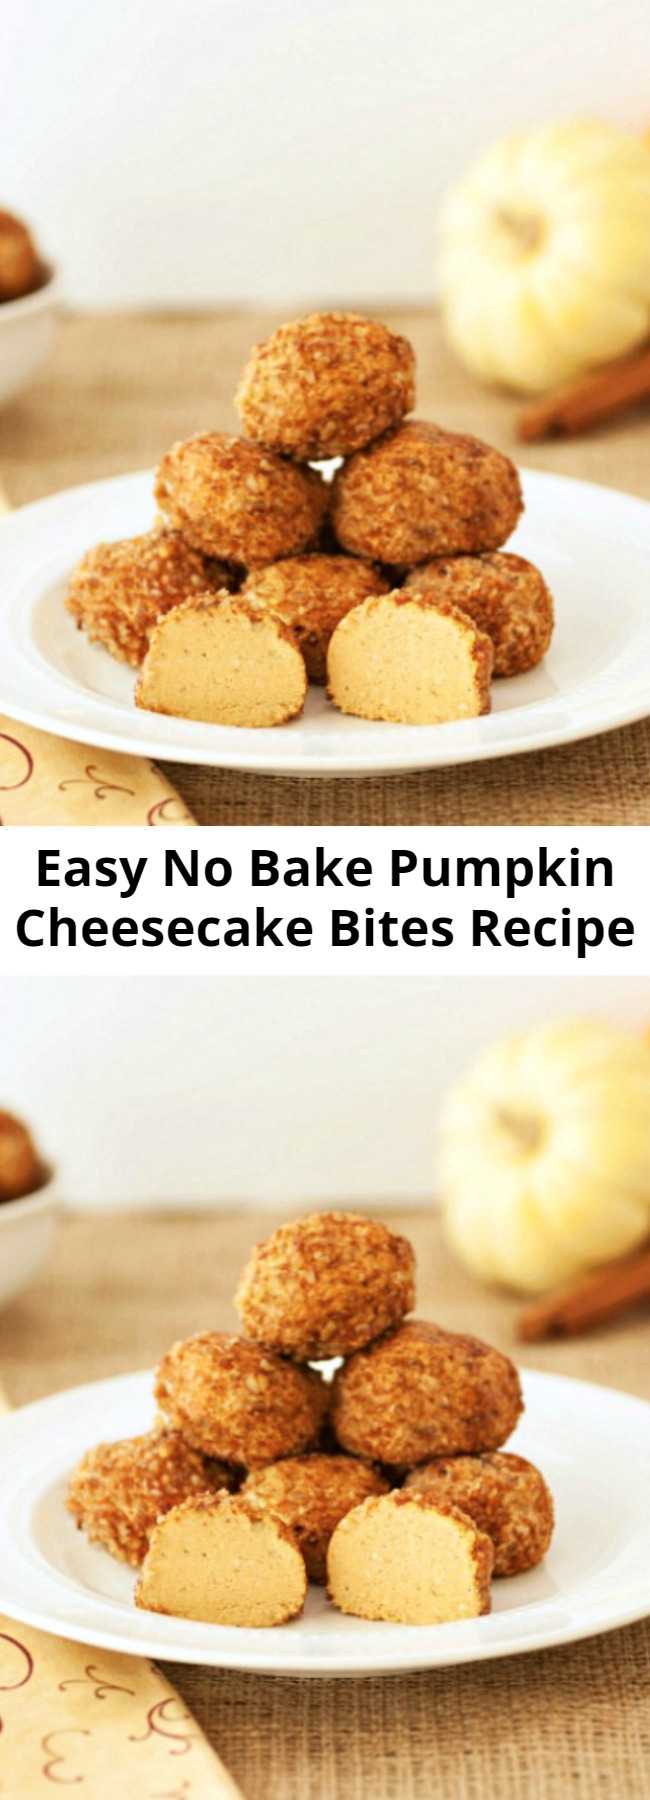 Easy No Bake Pumpkin Cheesecake Bites Recipe - These No Bake Pumpkin Cheesecake Bites are very easy to make. A simple treat that is low carb, grain free, and gluten free.